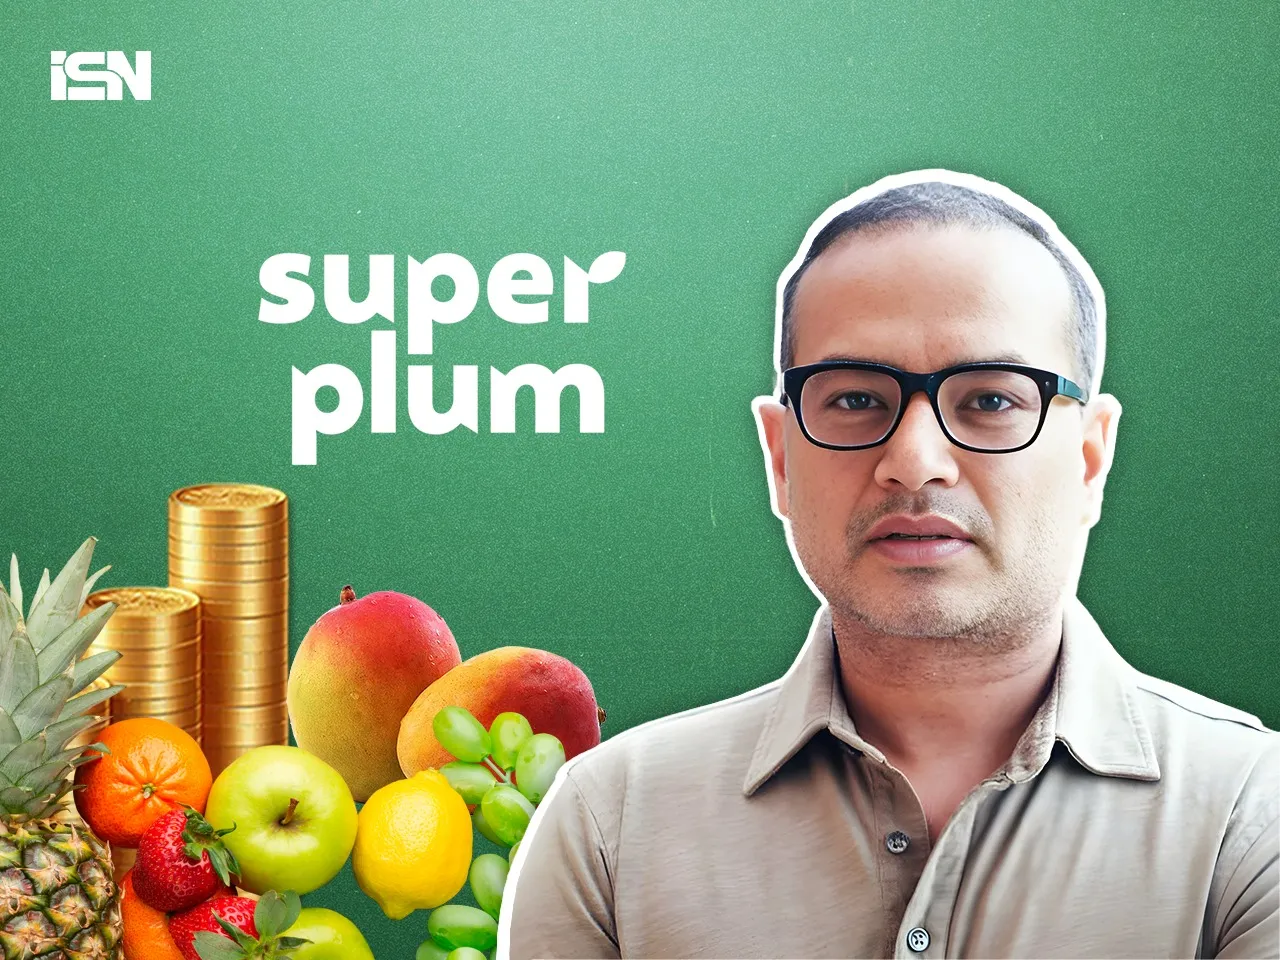 Superplum revolutionizing the fresh fruit supply chain raises $15M in a Series A funding round